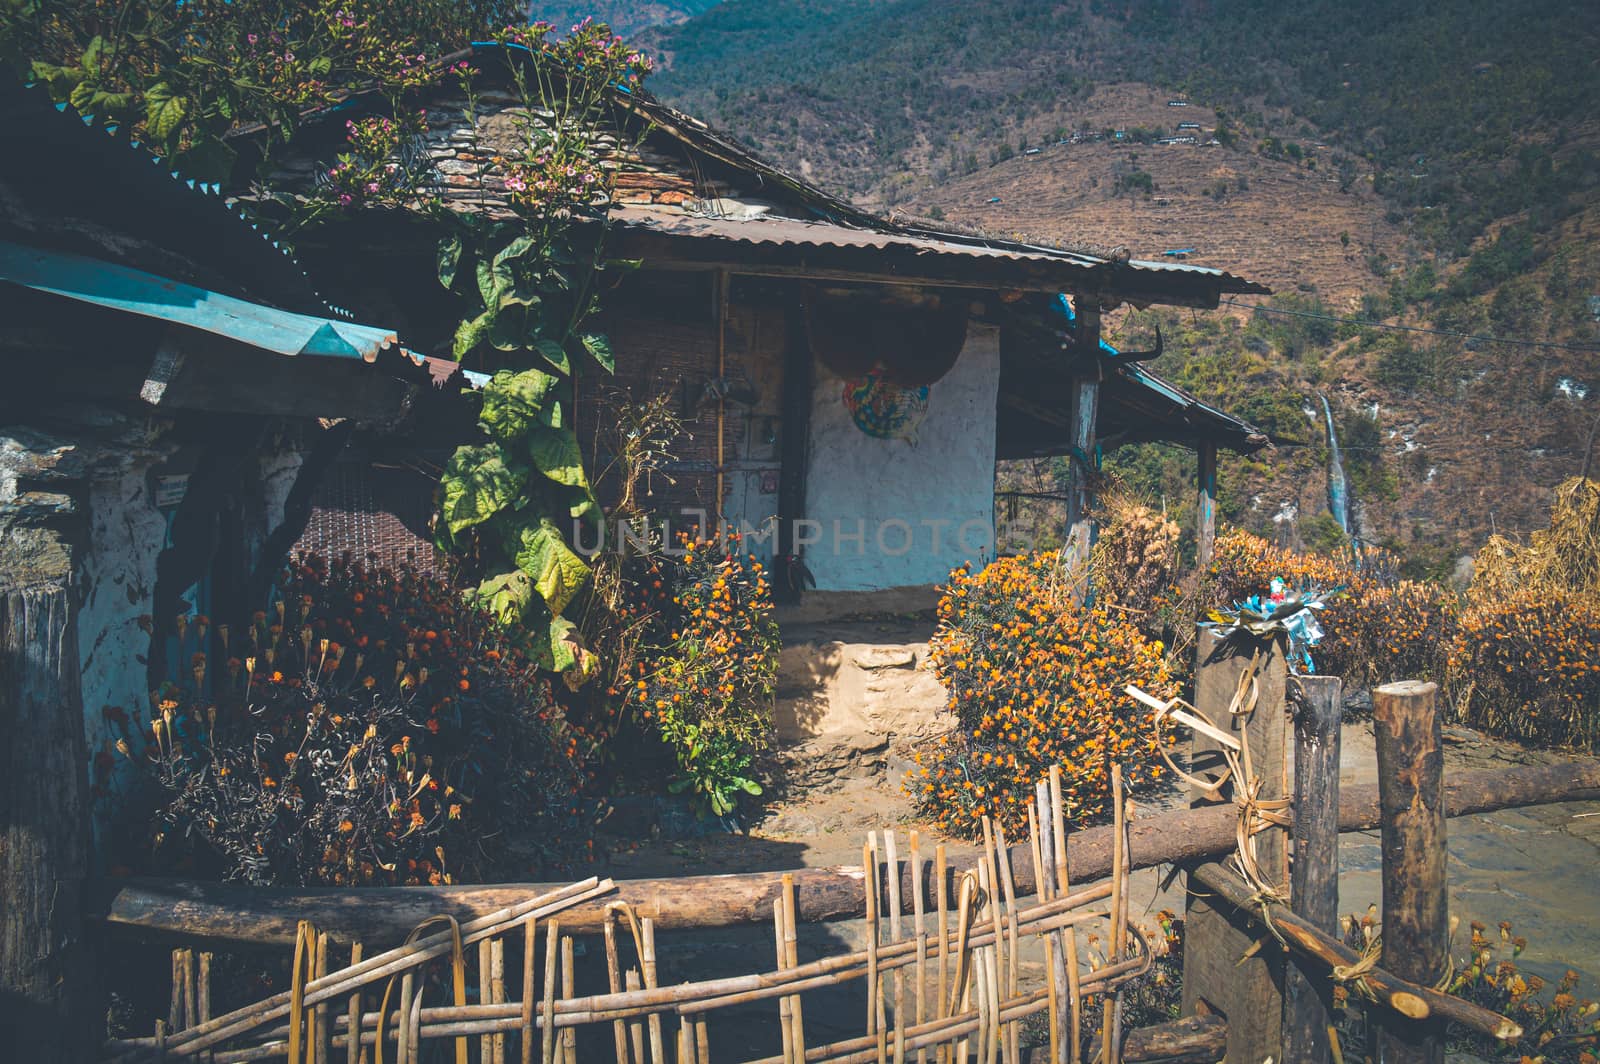 Traditional Nepalese mud house in the mountain village of Ghorepani in Pokhara, Nepal